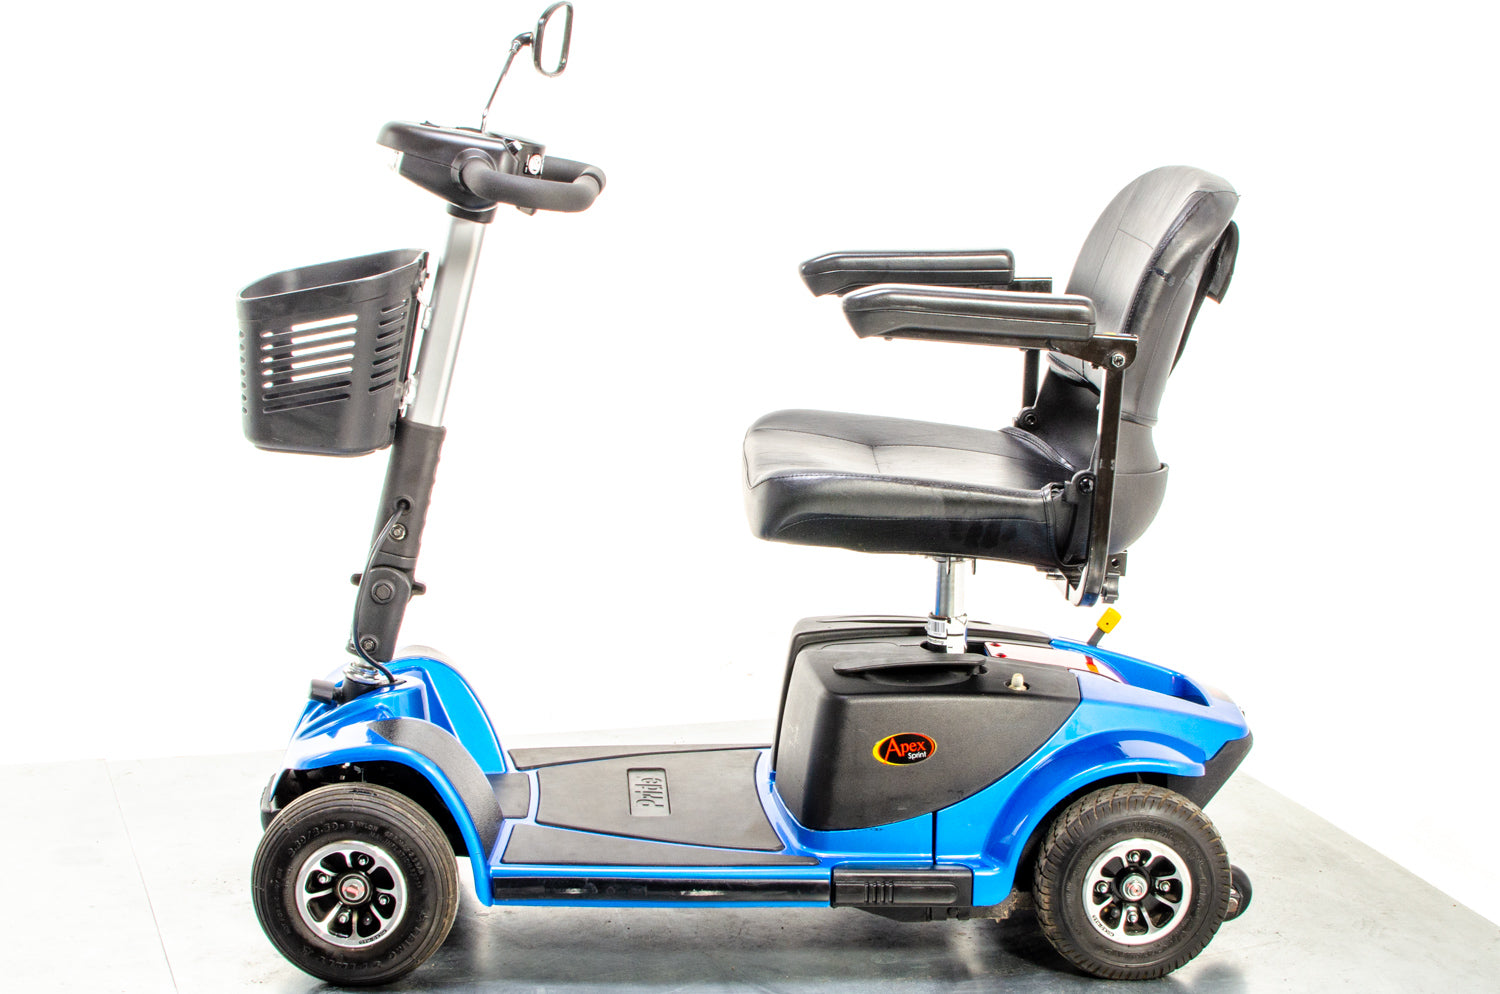 2015 Pride Apex Sprint Used Mobility Scooter 4mph Midsize Pavement Transportable Travel Blue